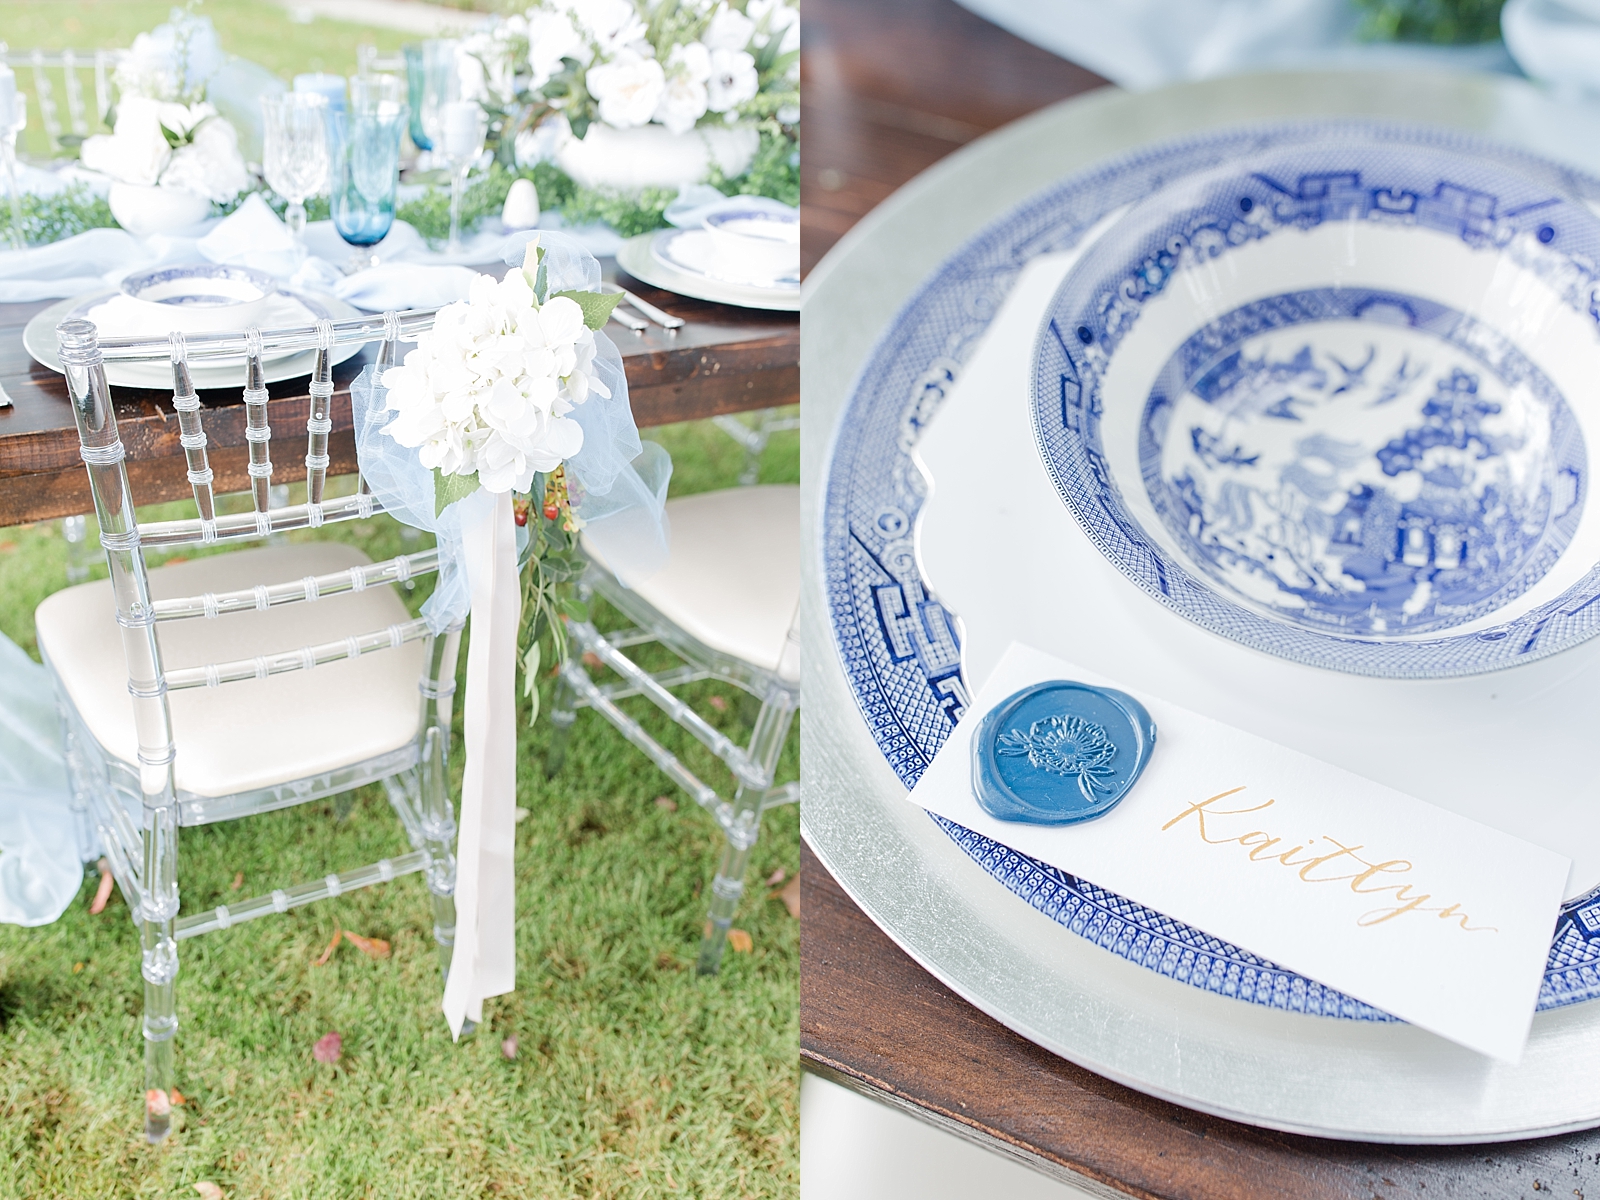 Dahlonega Wedding Venue reception table chair and place setting Photos